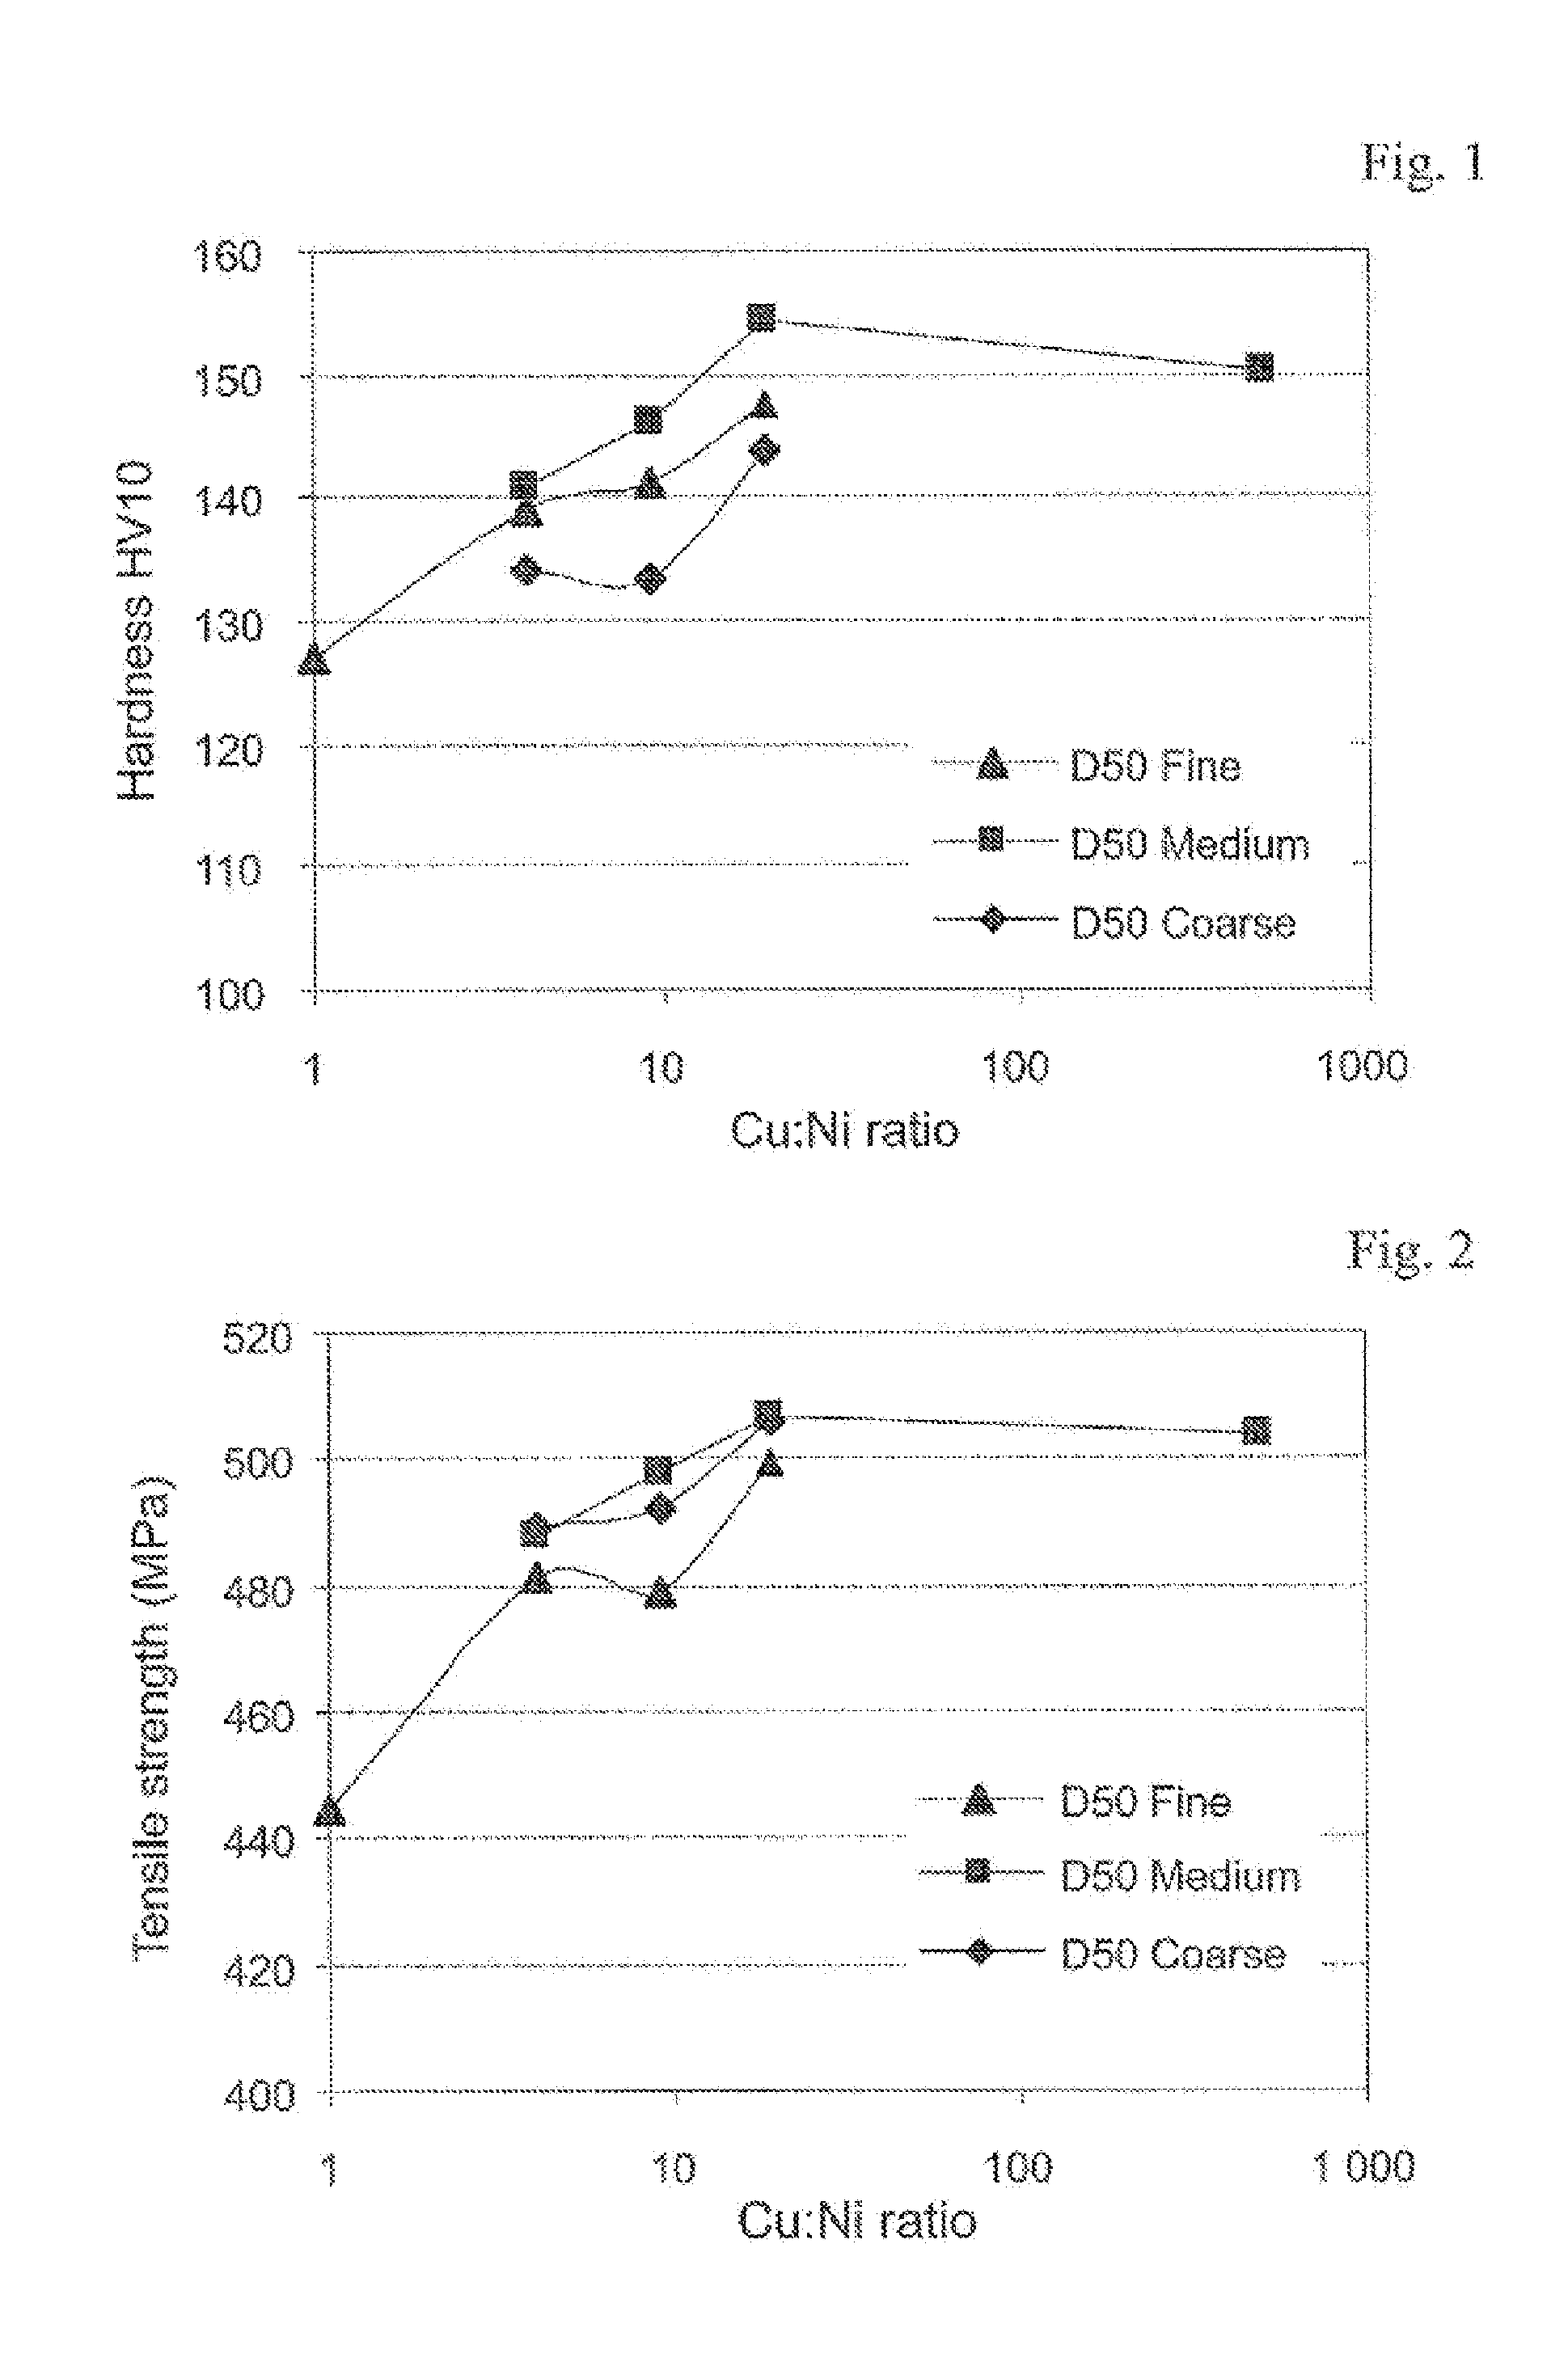 Method of producing a diffusion alloyed iron or iron-based powder, a diffusion alloyed powder, a composition including the diffusion alloyed powder, and a compacted and sintered part produced from the composition